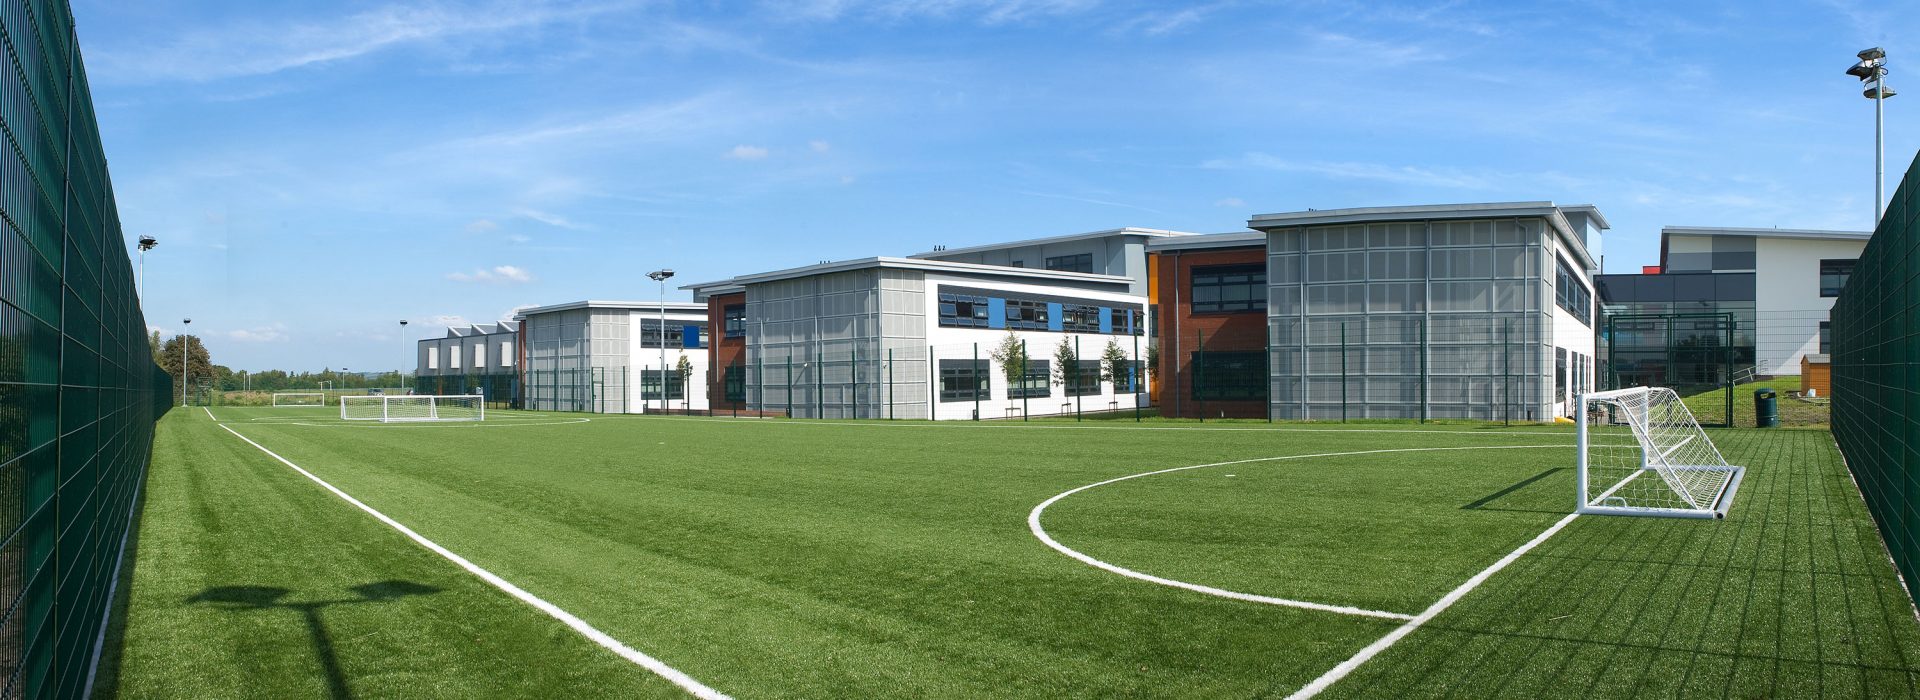 The Benefits of Artificial Grass Pitch at School